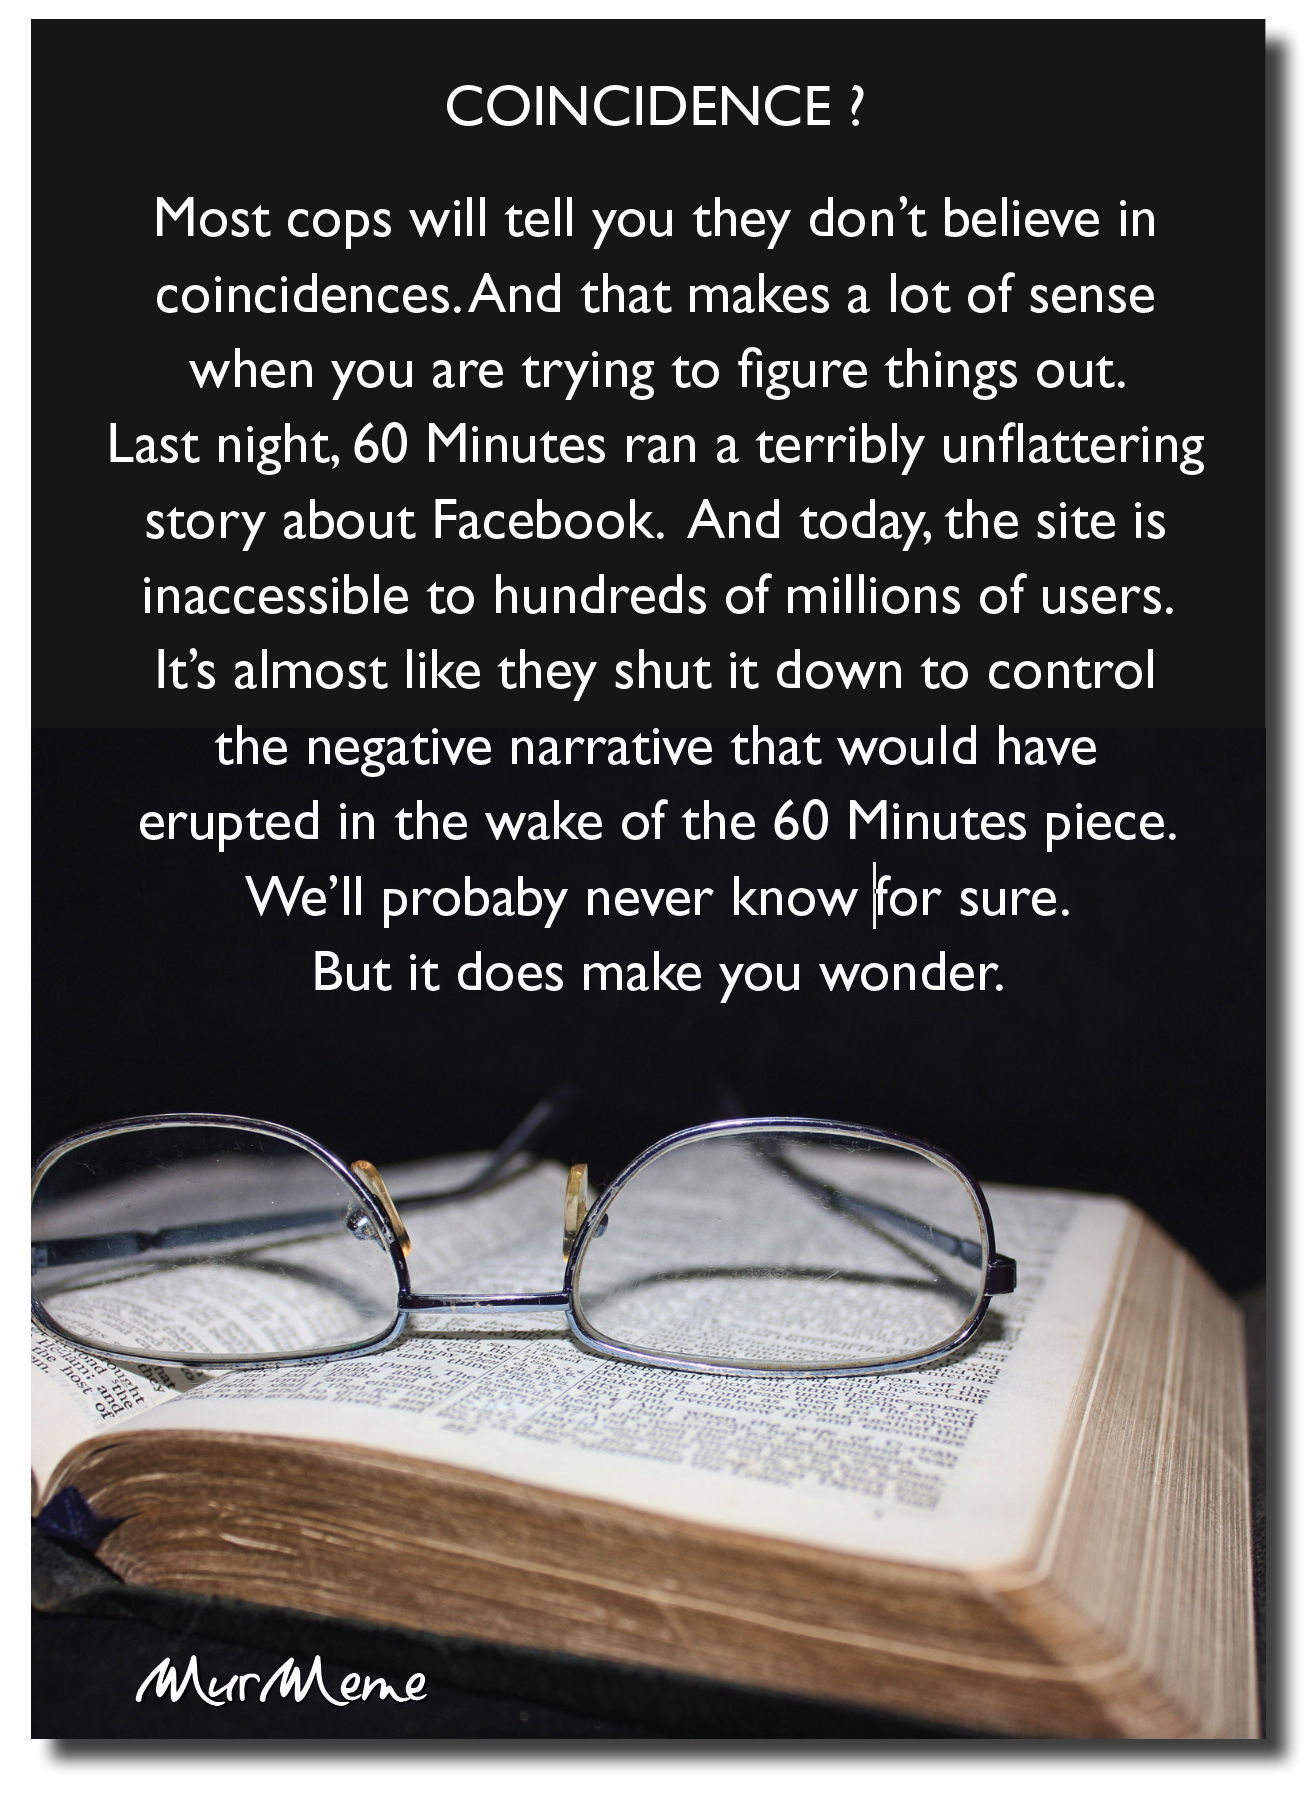 COINCIDENCE?

Most cops will tell you they don’t believe in
coincidences. And that makes a lot of sense
when you are trying to figure things out.
Last night, 60 Minutes ran a terribly unflattering
story about Facebook. And today, the site is
inaccessible to hundreds of millions of users.
It’s almost like they shut it down to control
the negative narrative that would have
erupted in the wake of the 60 Minutes piece
We'll probaby never know for sure.
But it does make you wonder.